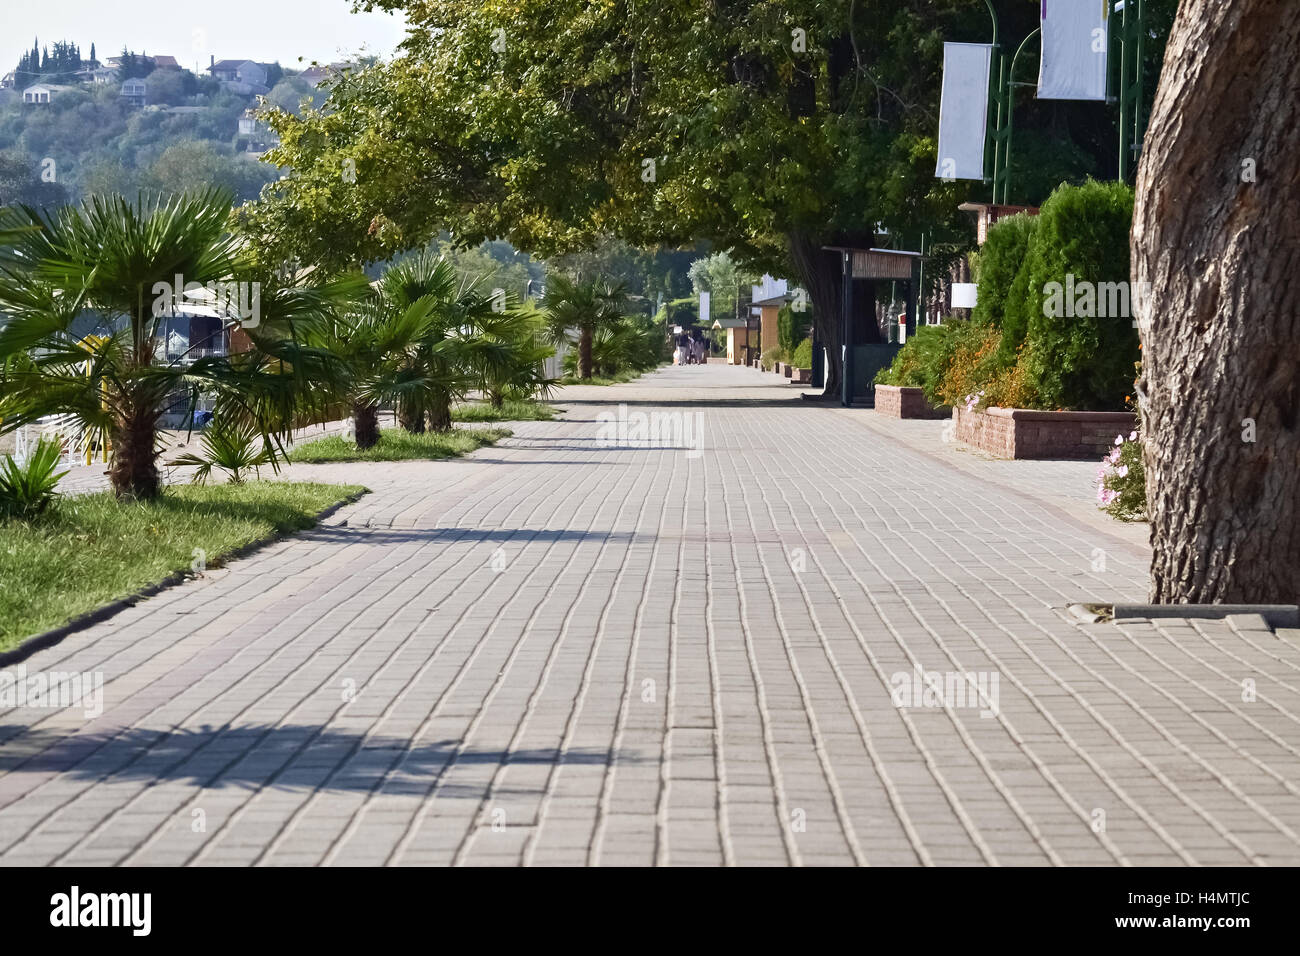 Detail of a small touristic place in Macedonia. Pavement in Old Dojran. Stock Photo